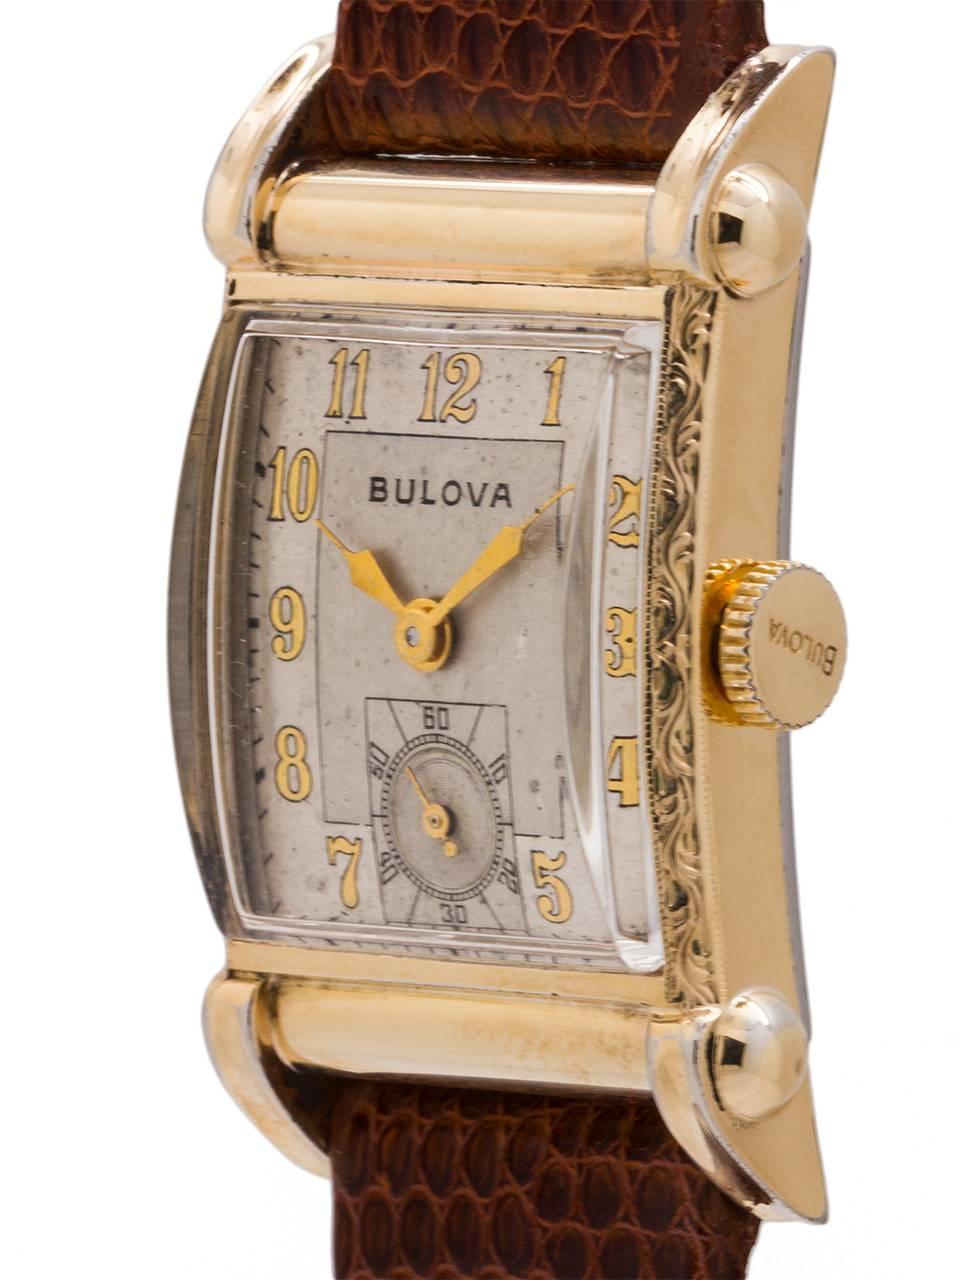 
Vintage man’s medium size Bulova YGF manual wind dress model circa 1949. Featuring a 21 X 37mm rectangular case with decorative engraved gold filled bezel and horned lugs, domed acrylic crystal, and pleasing original matte silvered dial with gold